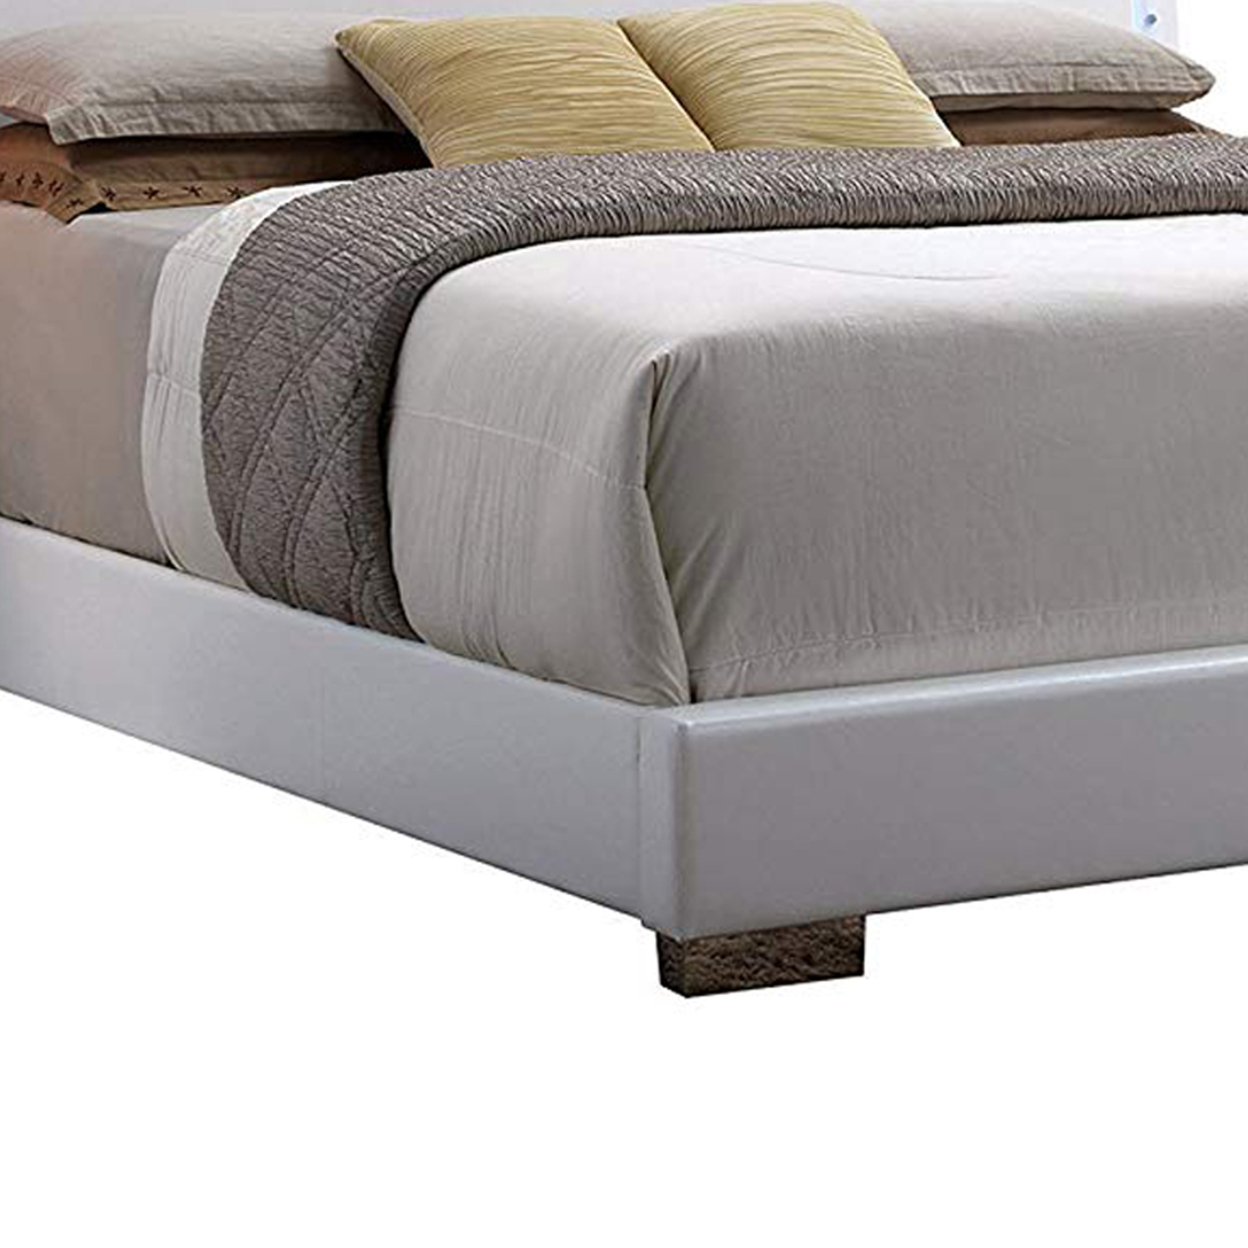 Contemporary Style Queen Size Wooden Panel Bed With Headboard, White- Saltoro Sherpi